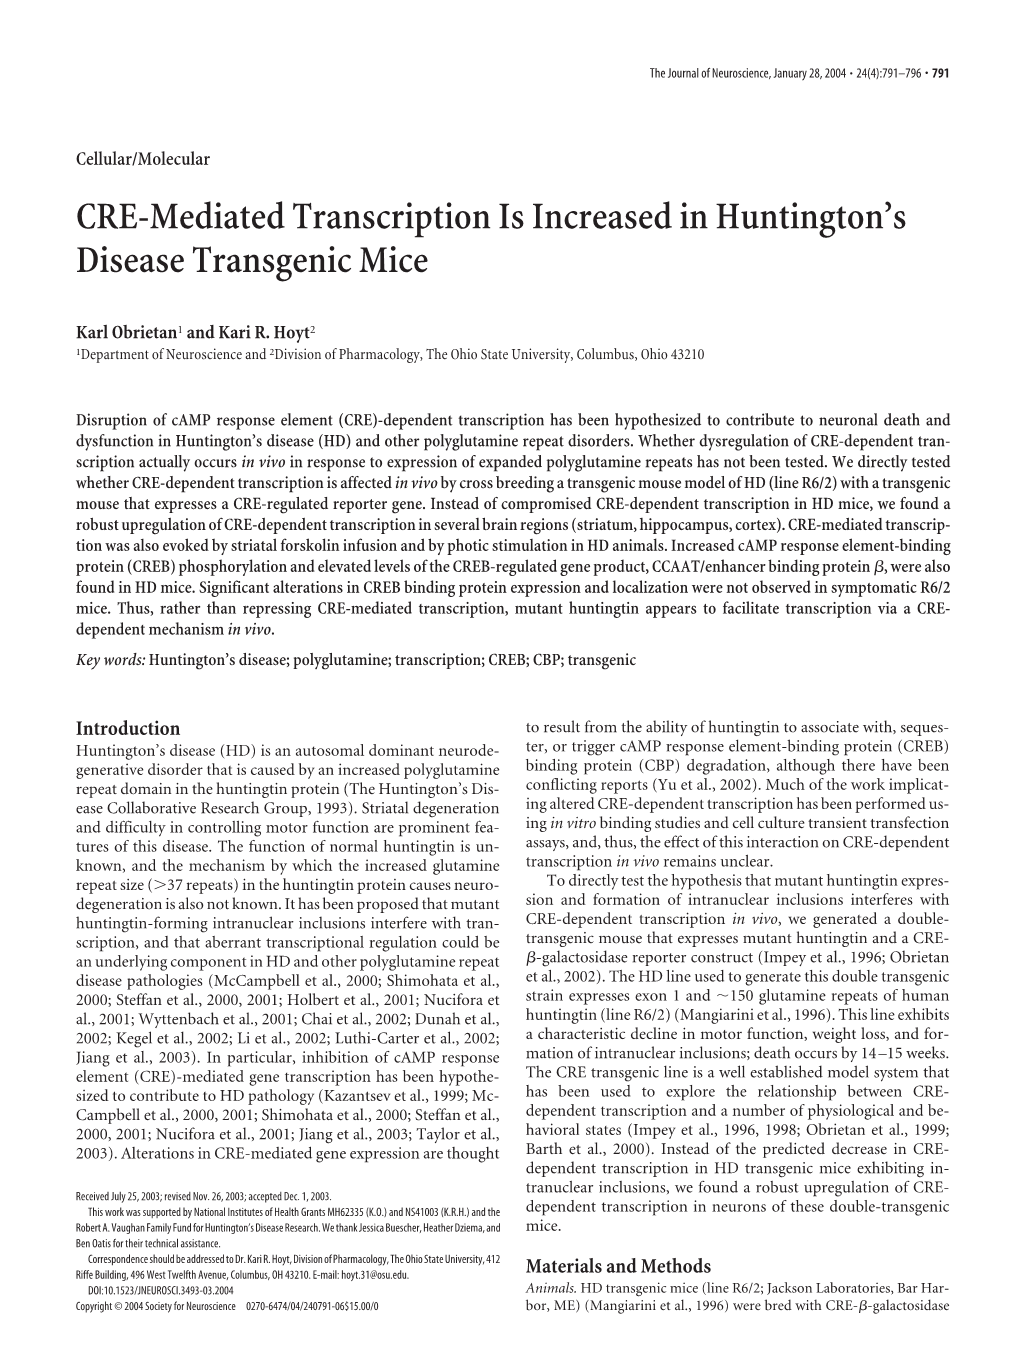 CRE-Mediated Transcription Is Increased in Huntington's Disease